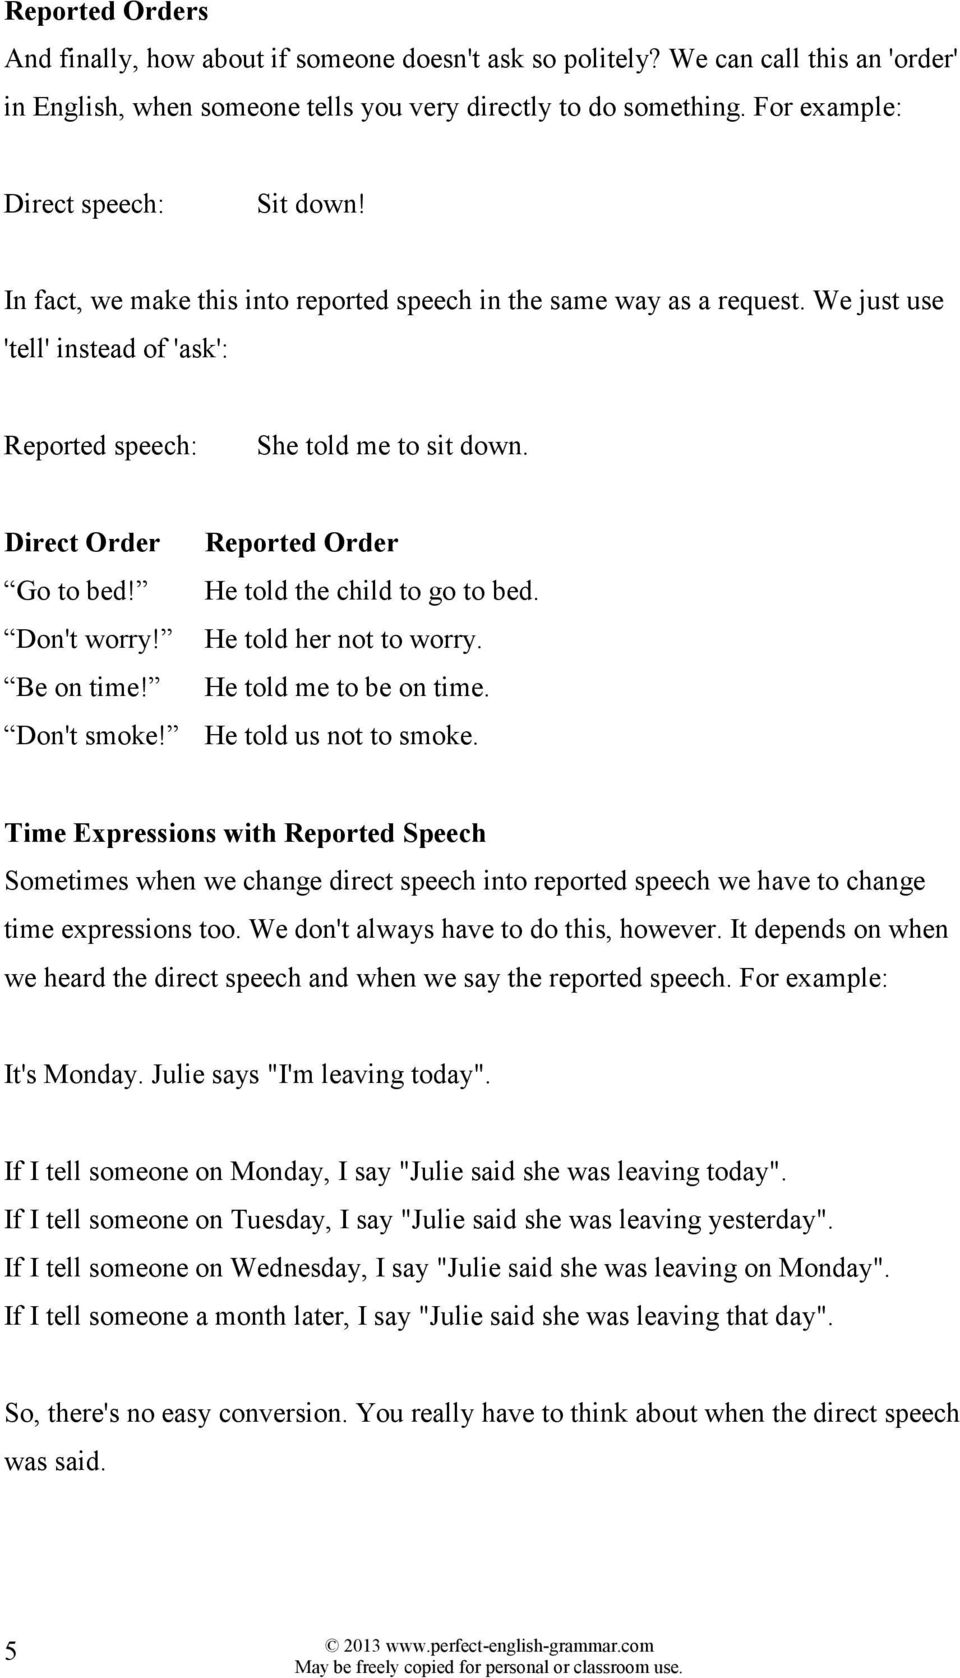 speech on how to do something